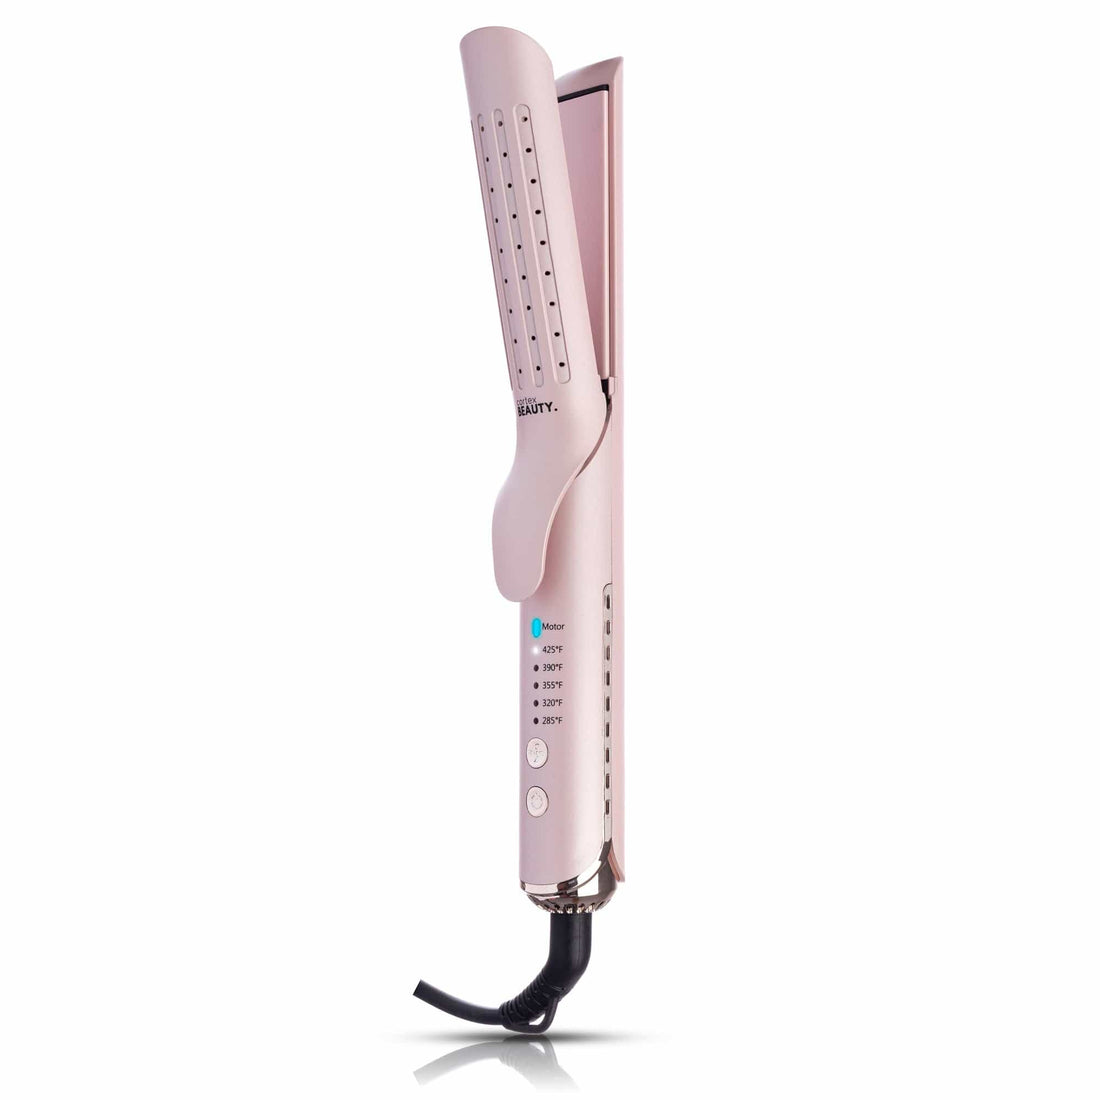 Cortex Beauty AirGlider | 2-in-1 Cool Air Flat Iron/curler